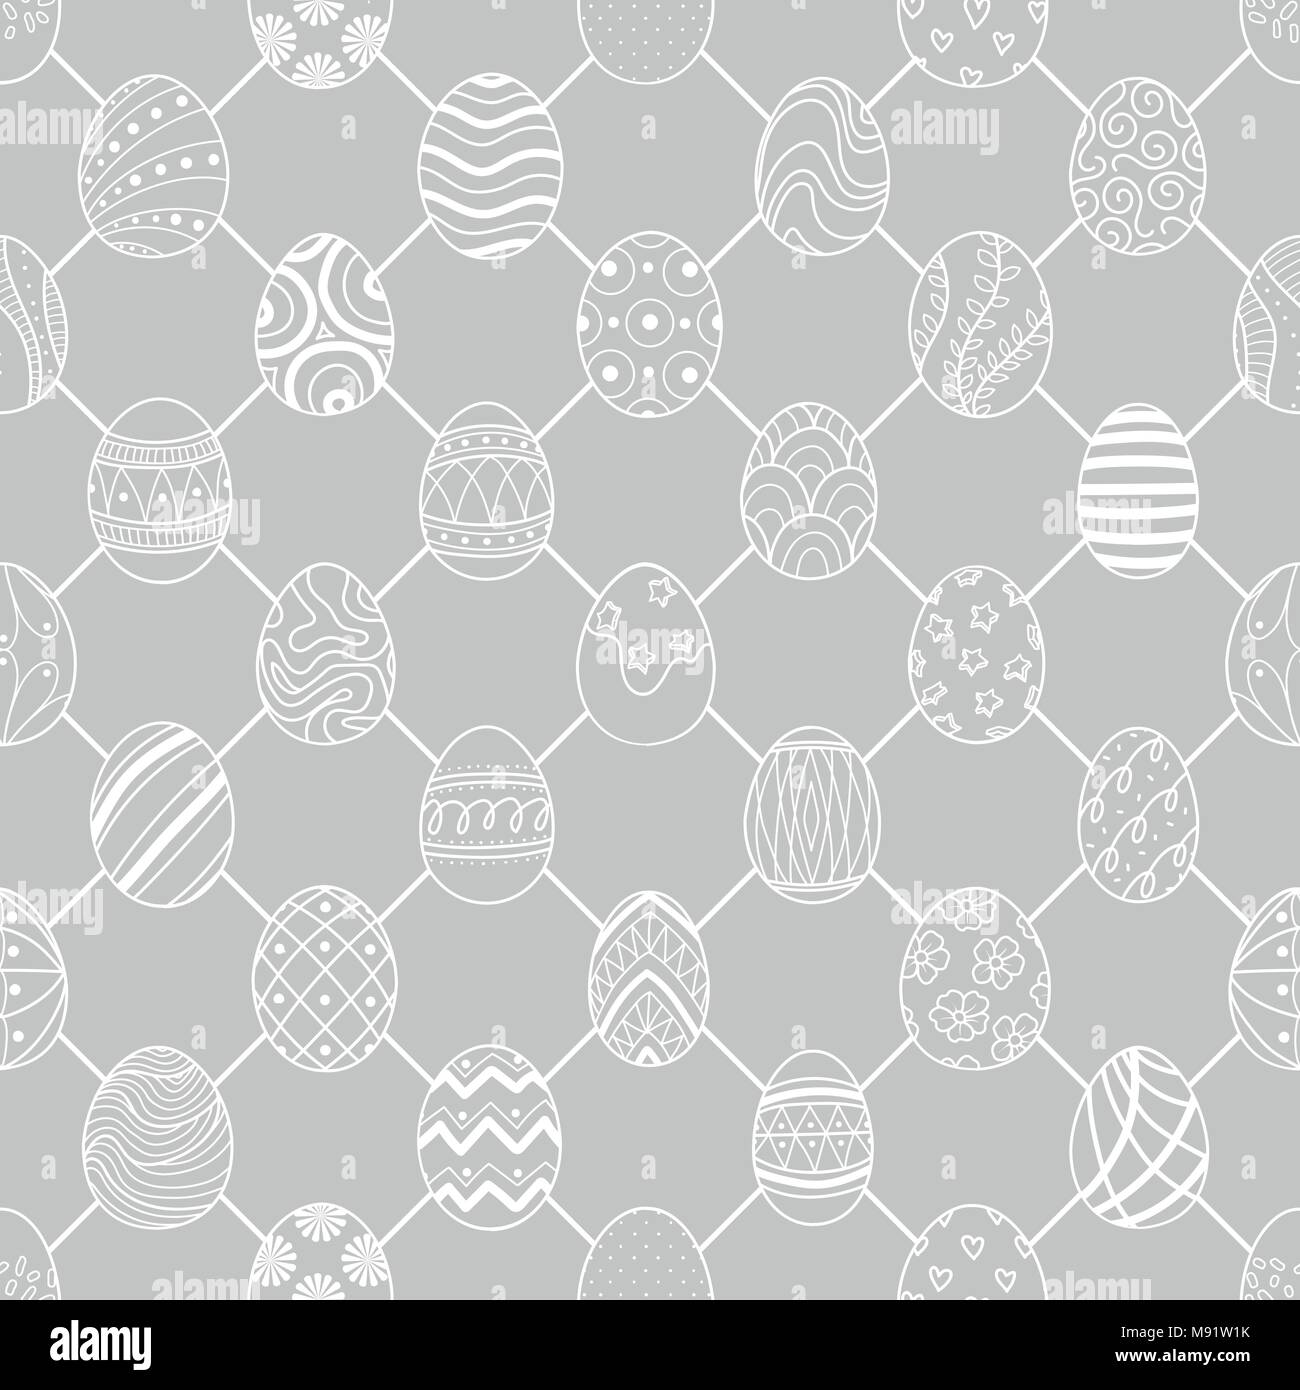 Cute Easter eggs in white outline are at junctions on light gray background. Cute hand drawn seamless pattern design for Easter festival in vector ill Stock Vector